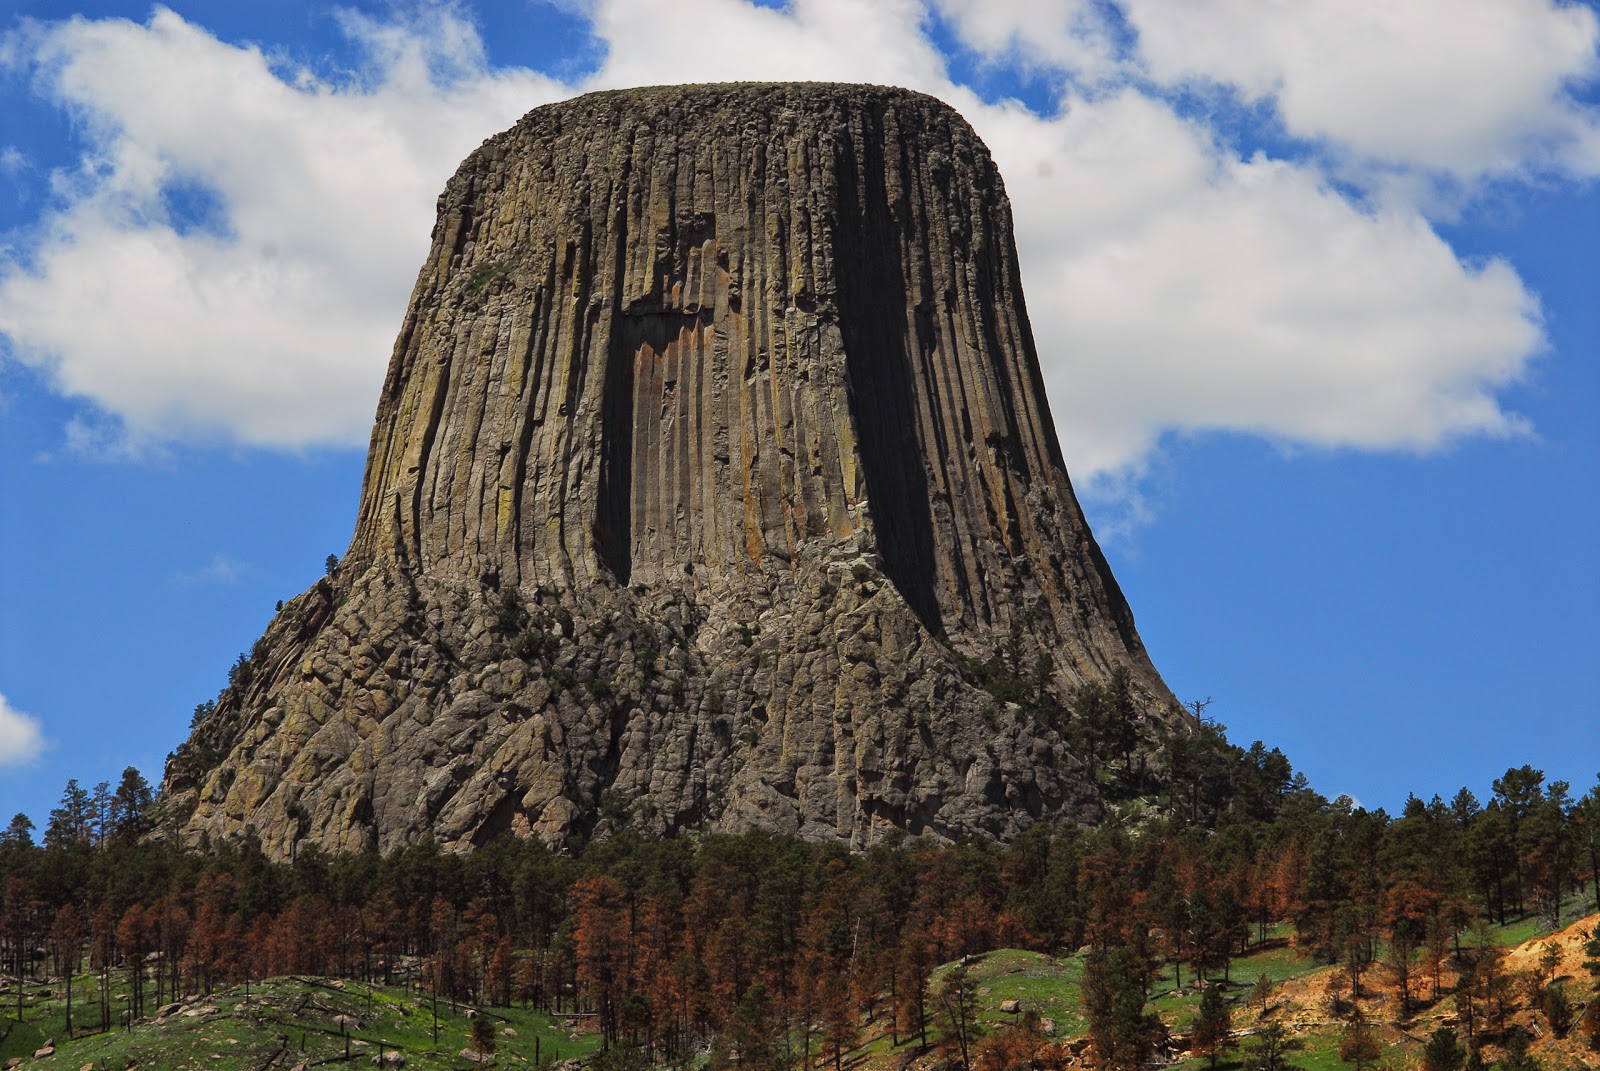 Devils Tower – Not a Tree Stump